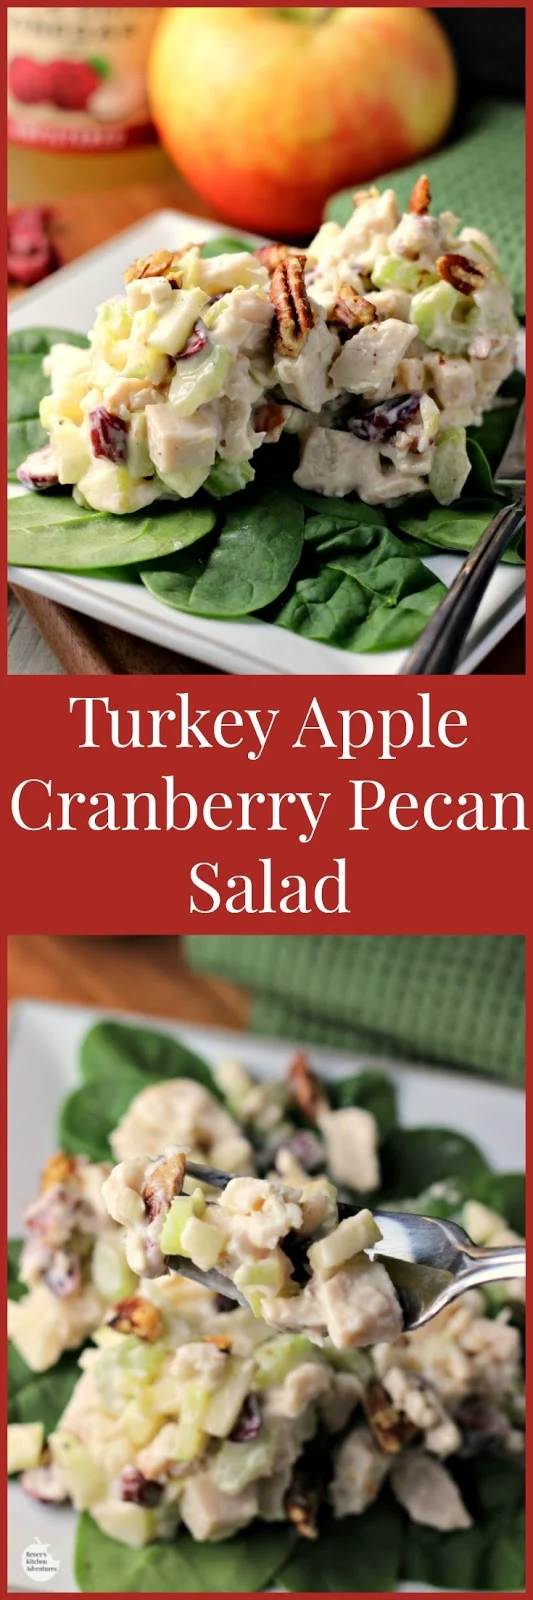 Turkey Apple Cranberry Pecan Salad | by Renee's Kitchen Adventures - an easy, healthy recipe for turkey salad. Makes a great lunch or dinner. Perfect way to re-purpose holiday leftovers!